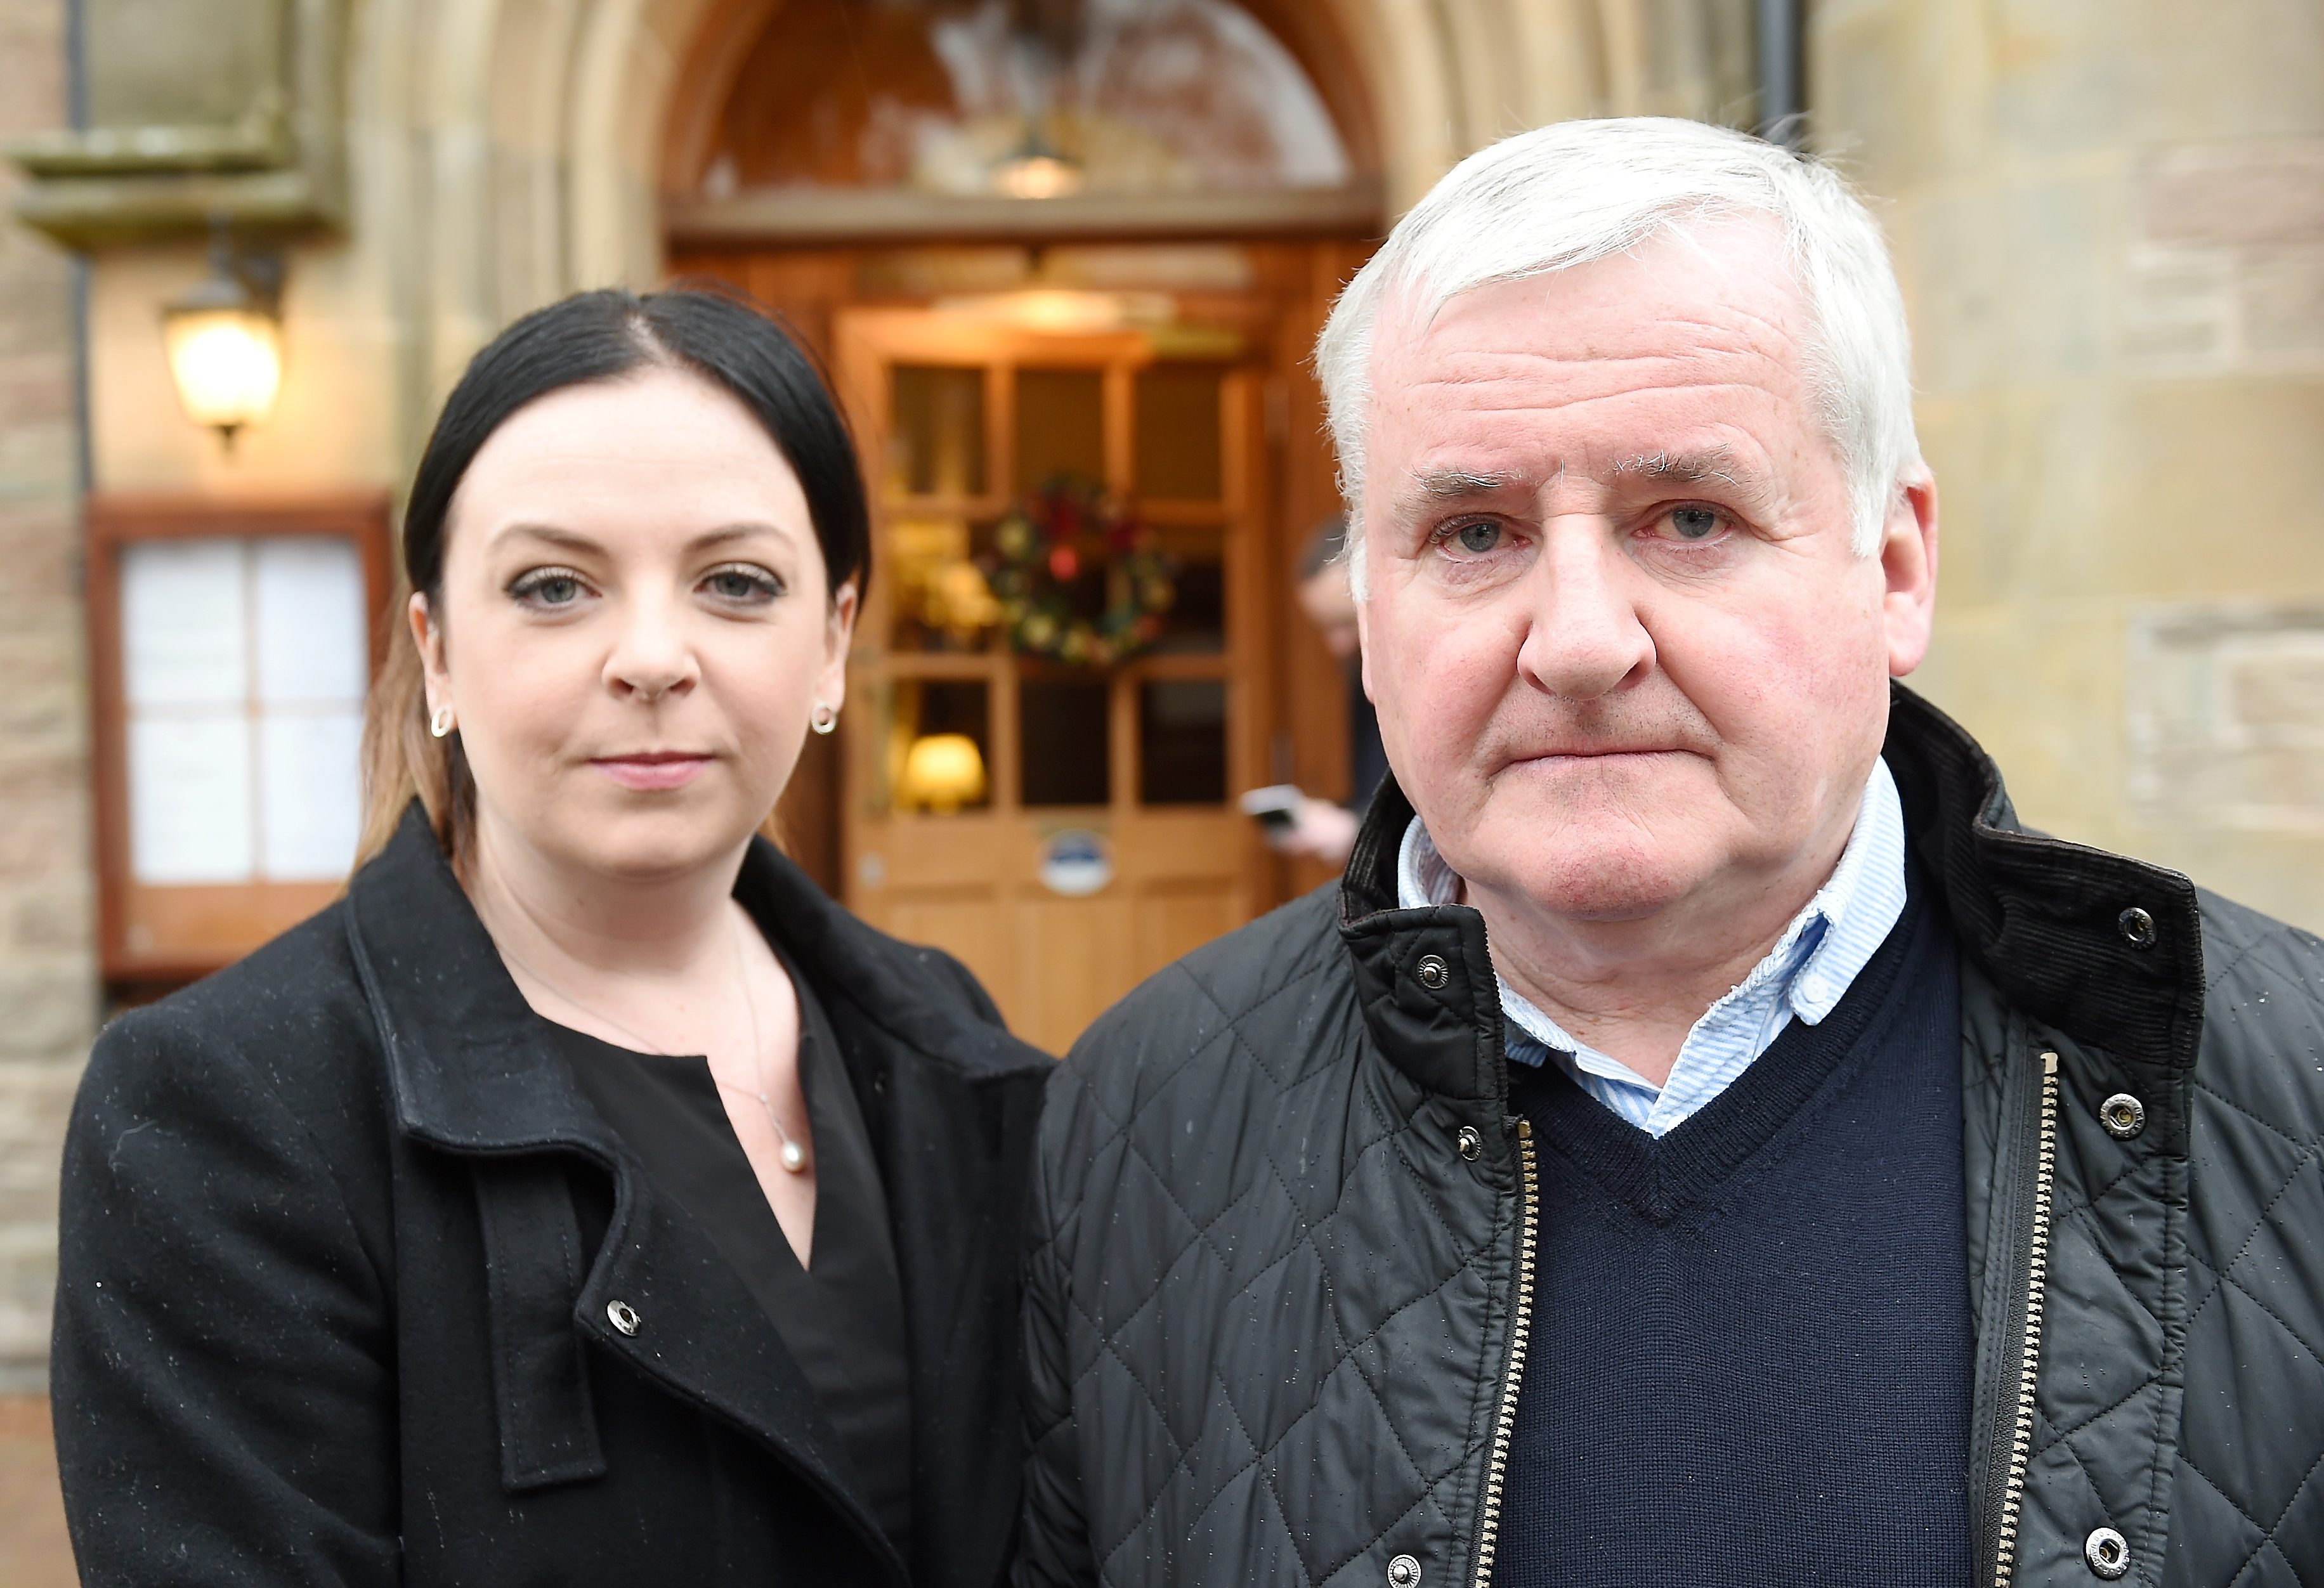 Henry Dow and Julie Lister photographed ahead of the hearing in the Lochardil Hotel, Inverness